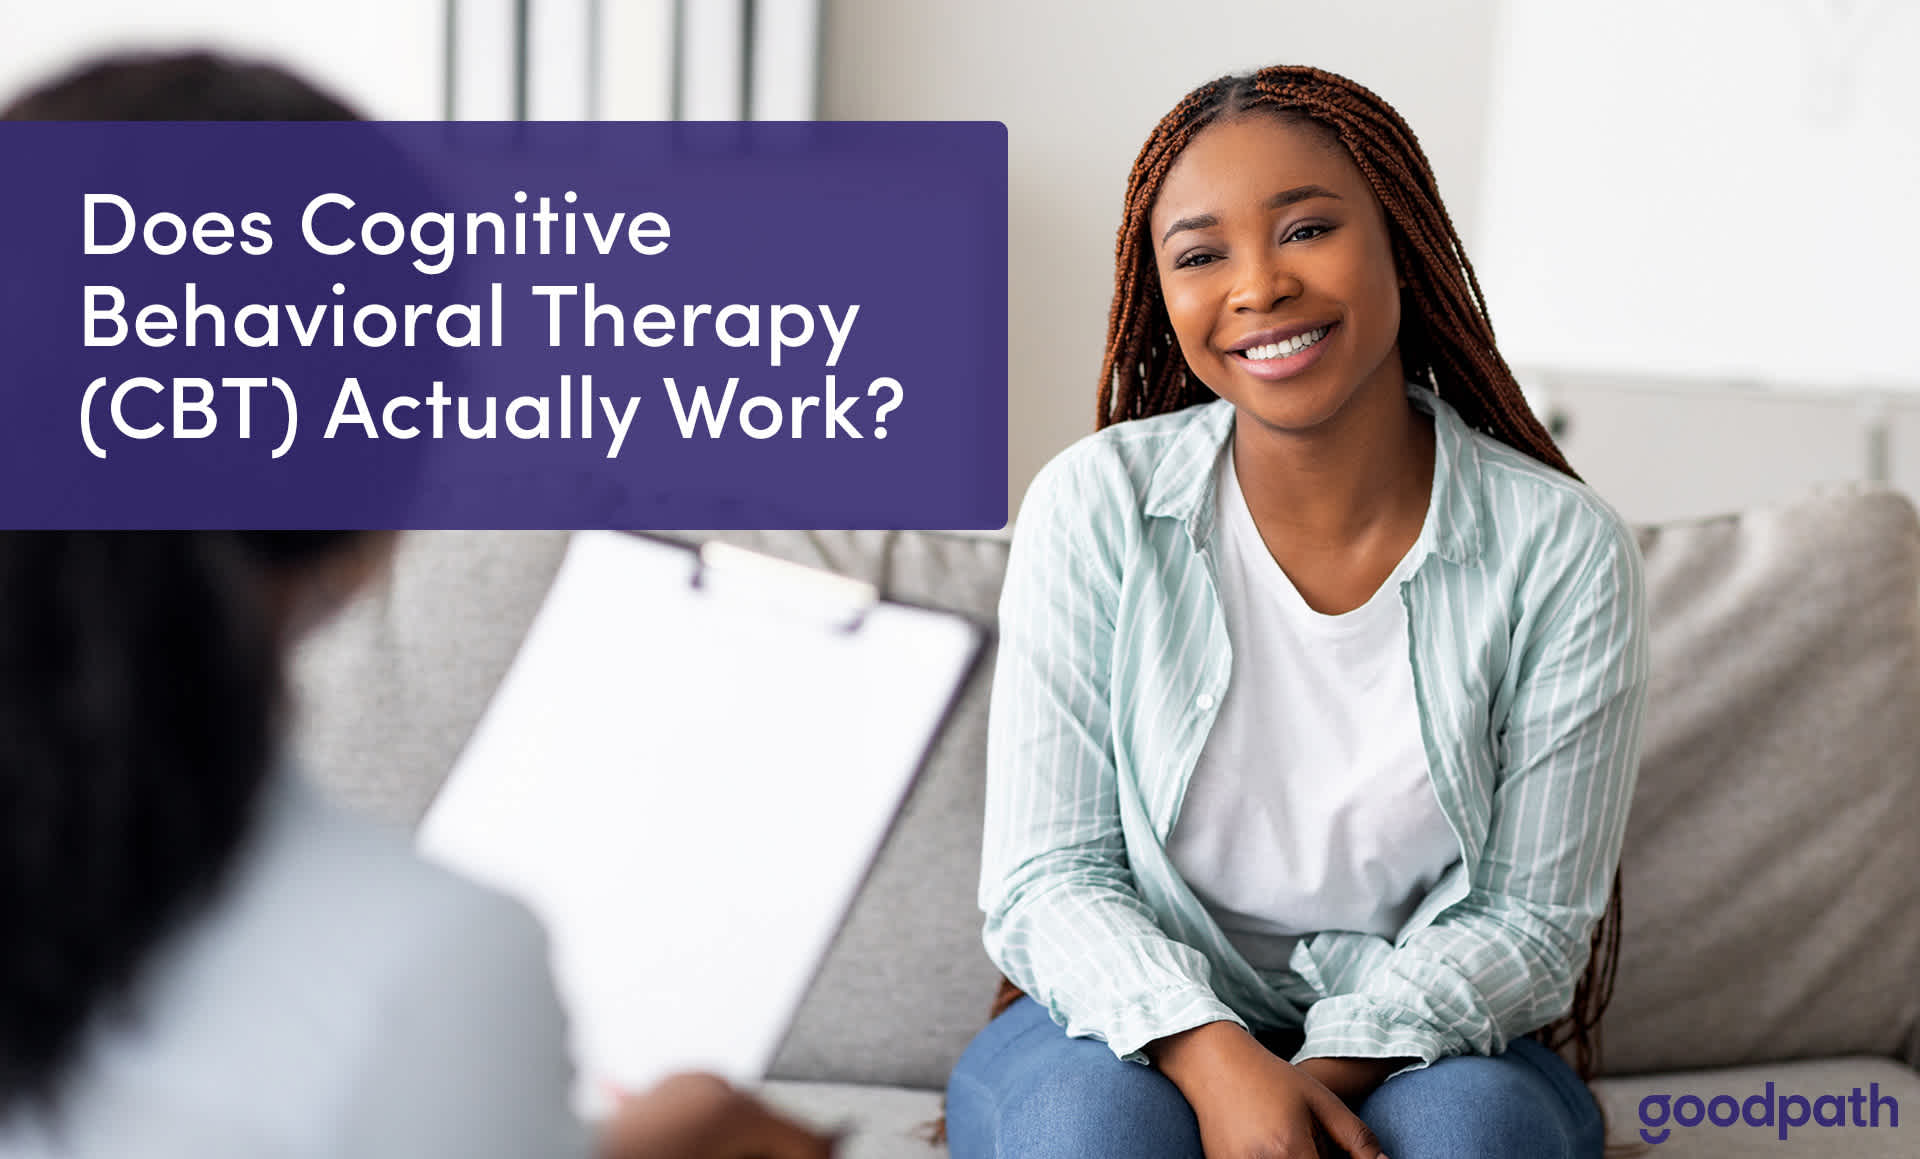 Does Cognitive Behavioral Therapy (CBT) actually work?